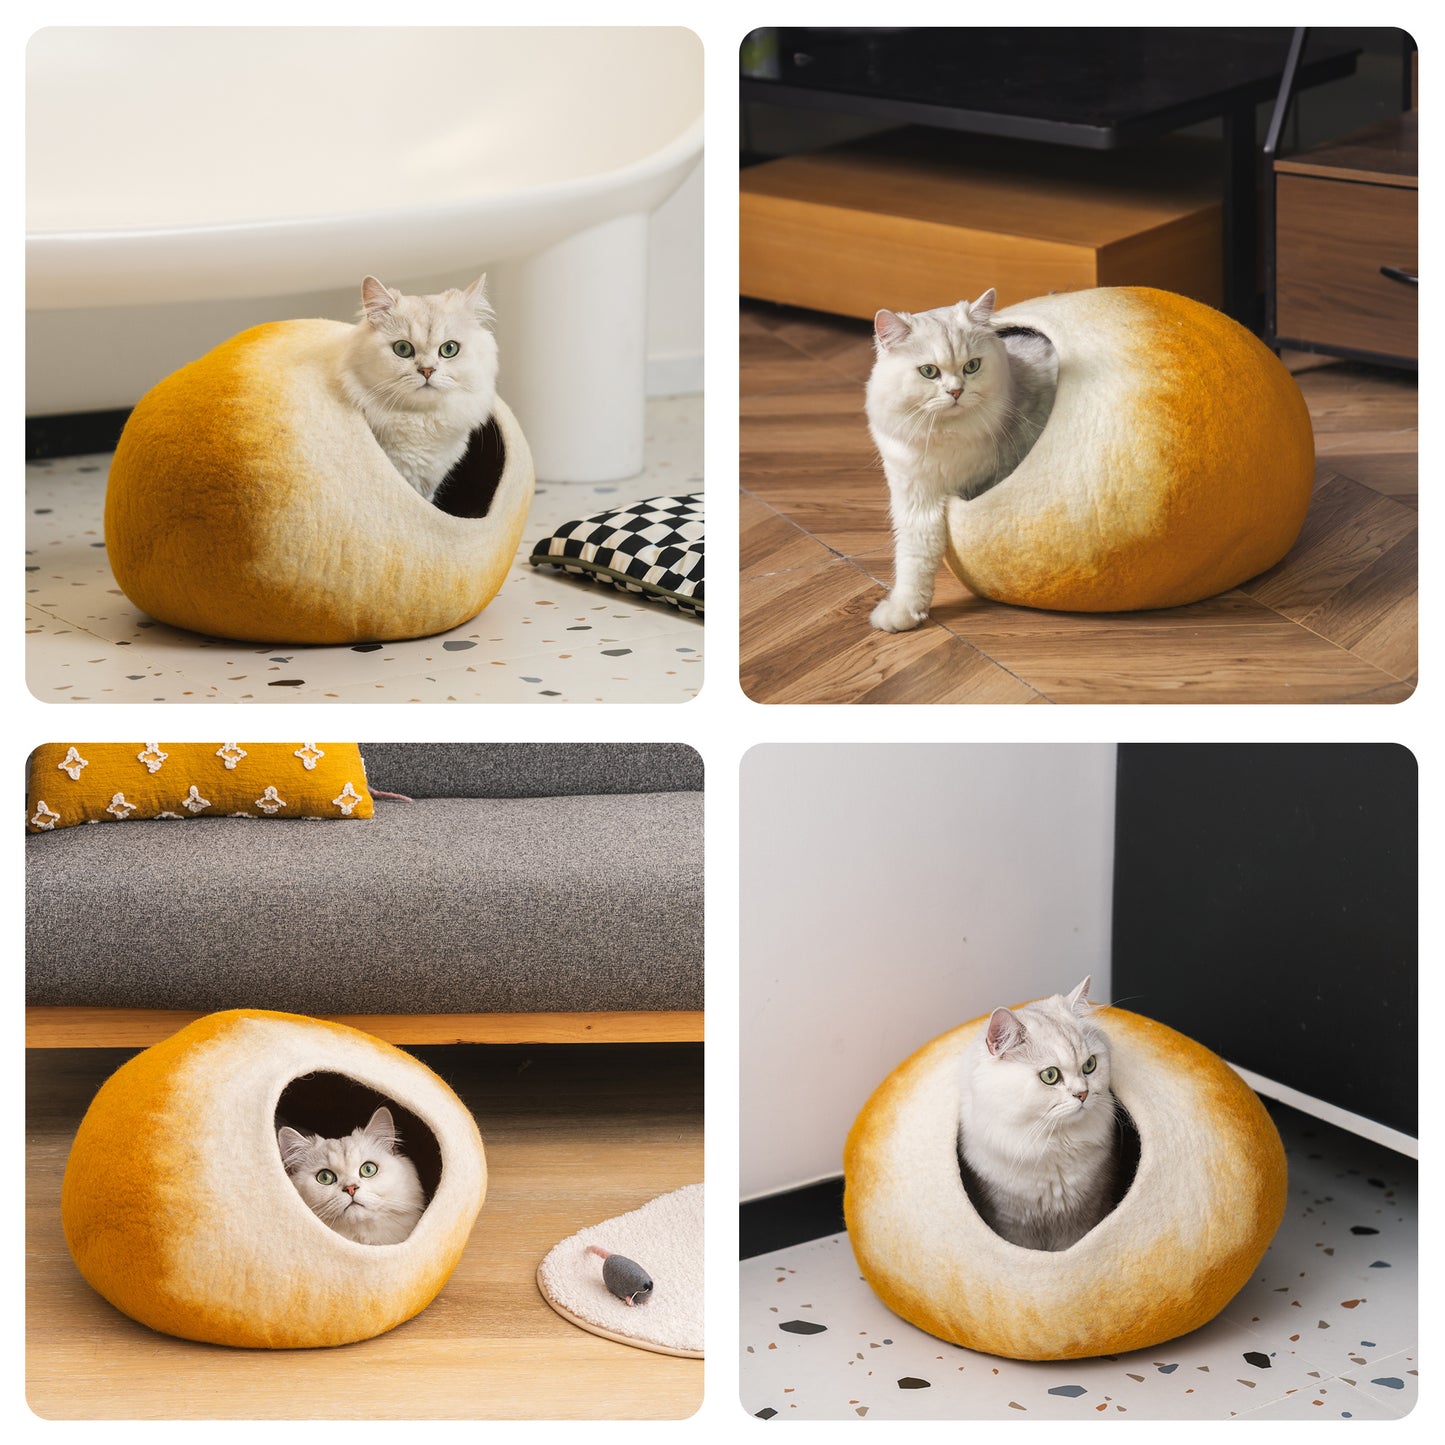 MewooFun Trendy Felt Cat Bed Cave Round Nest Wool Bed Gray for Cats and Kittens